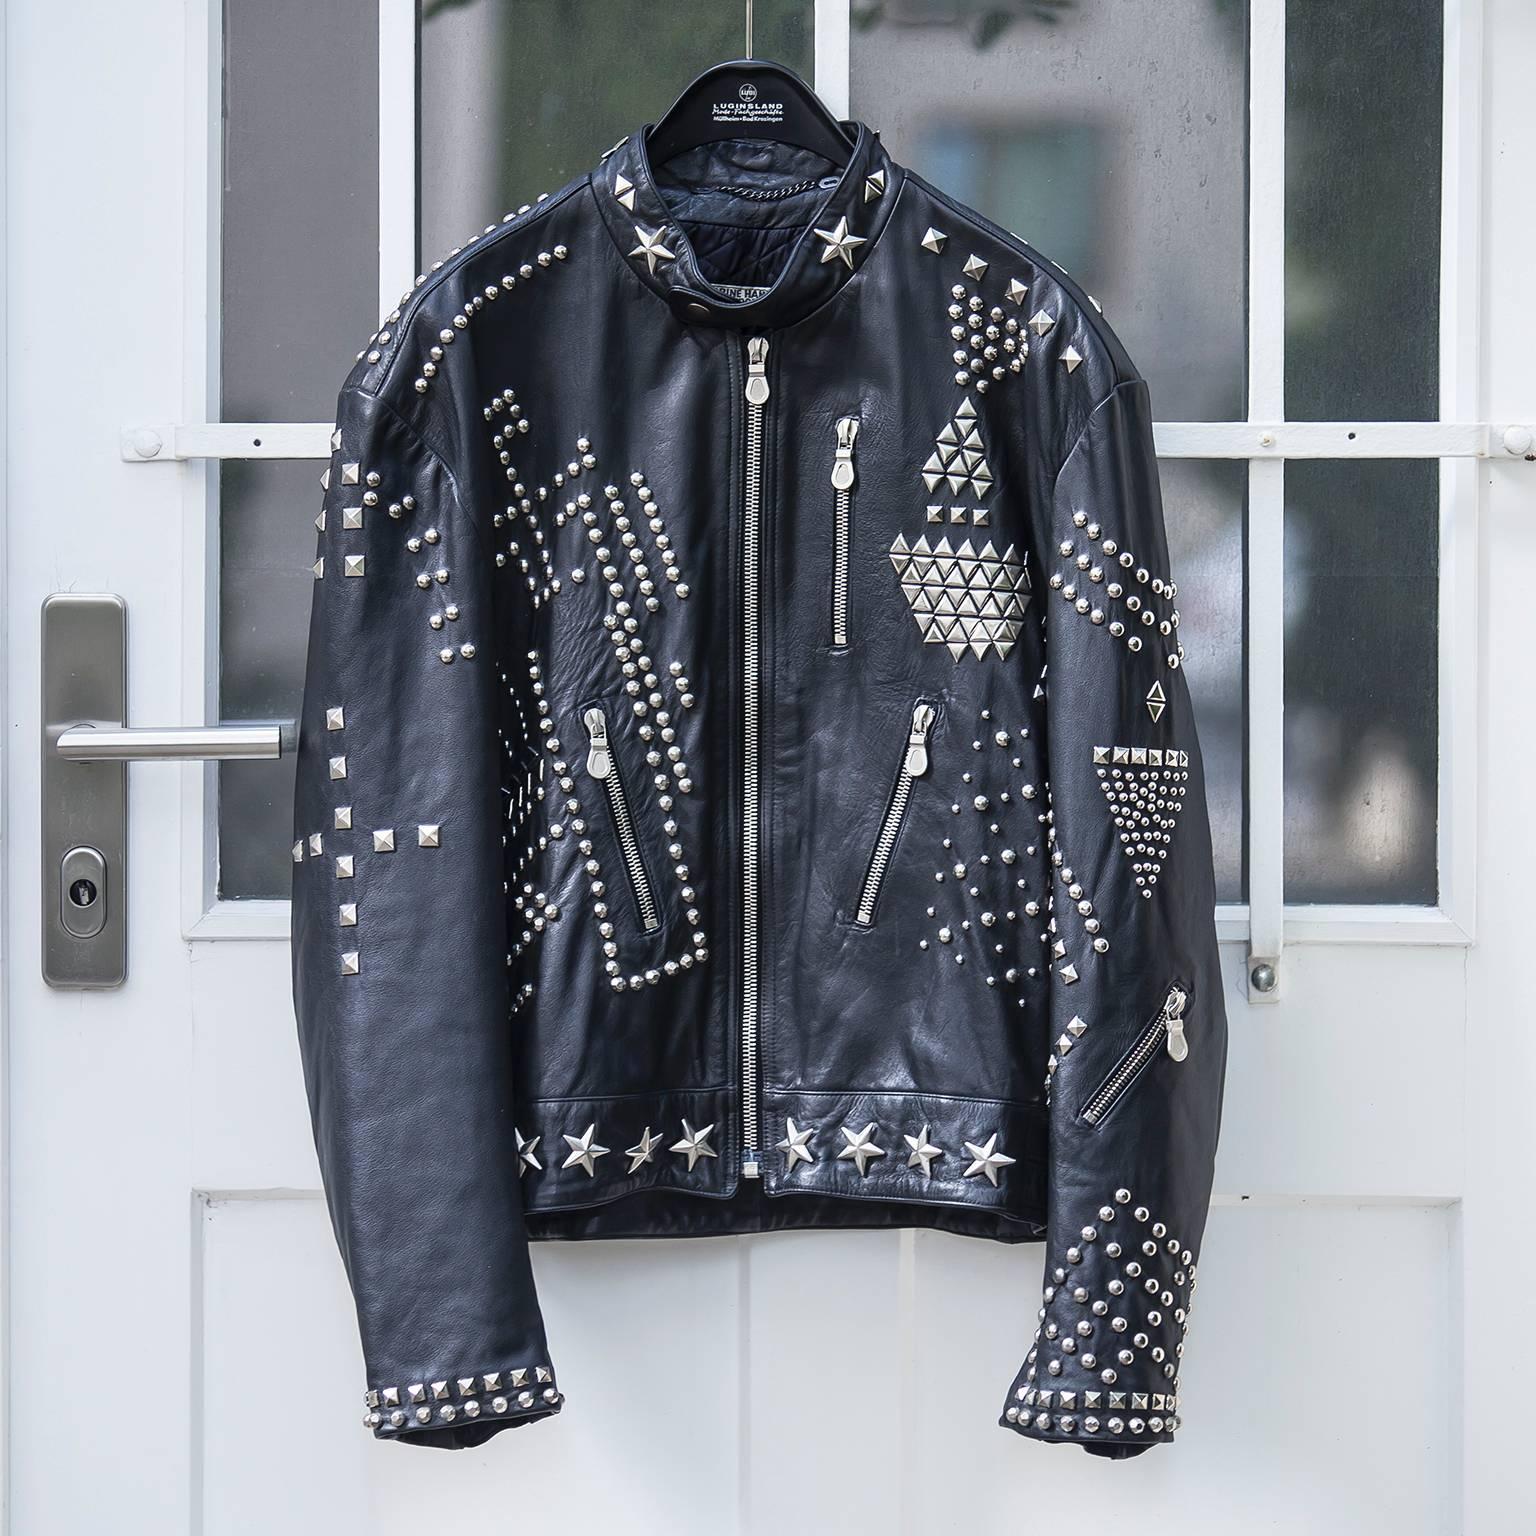 Katherine Hamnett clean up or die man leather jacket, 1989.
Studwork embellishes the entire surface of this black leather jacket from Katherine Hamnett’s Winter 1990 ‘Clean Up or Die’ collection. Hexagonal facetted studs and round studs are riveted